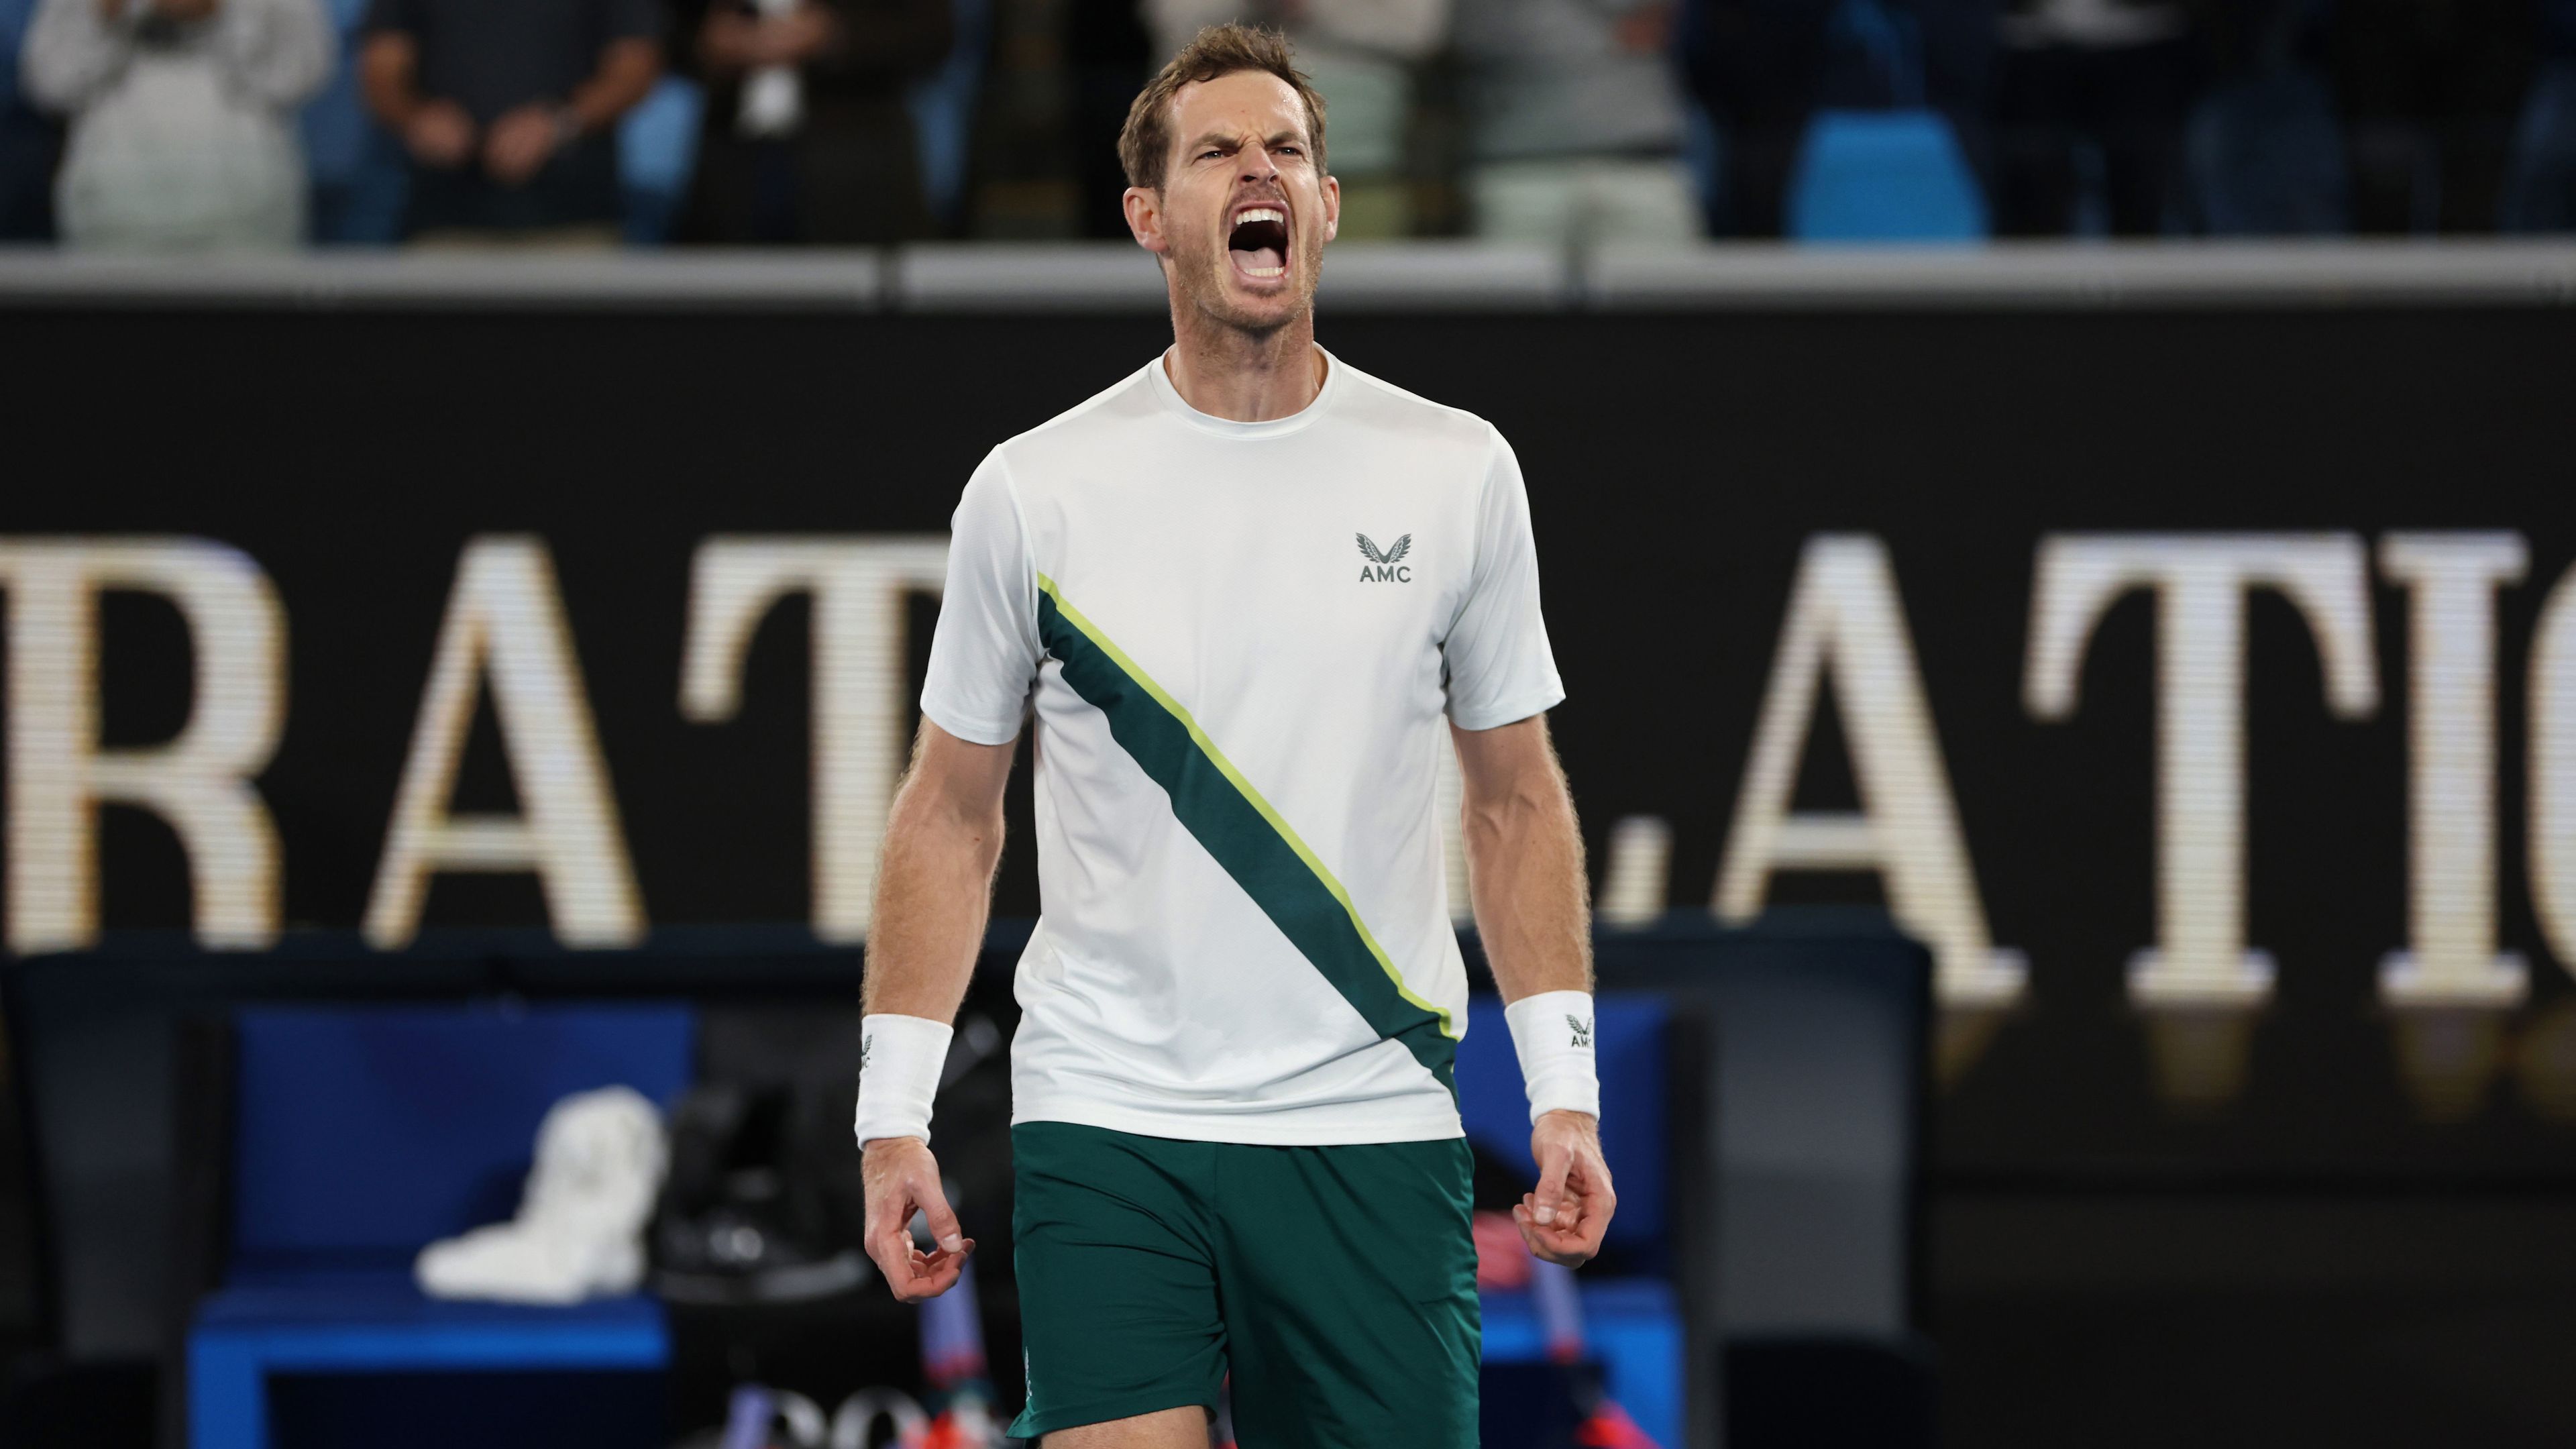 MELBOURNE, AUSTRALIA - JANUARY 19:  Andy Murray of Great Britain celebrates to the crowd after his five set victory in their round two singles match against Thanasi Kokkinakis of Australia during day four of the 2023 Australian Open at Melbourne Park on January 19, 2023 in Melbourne, Australia. (Photo by Clive Brunskill/Getty Images)